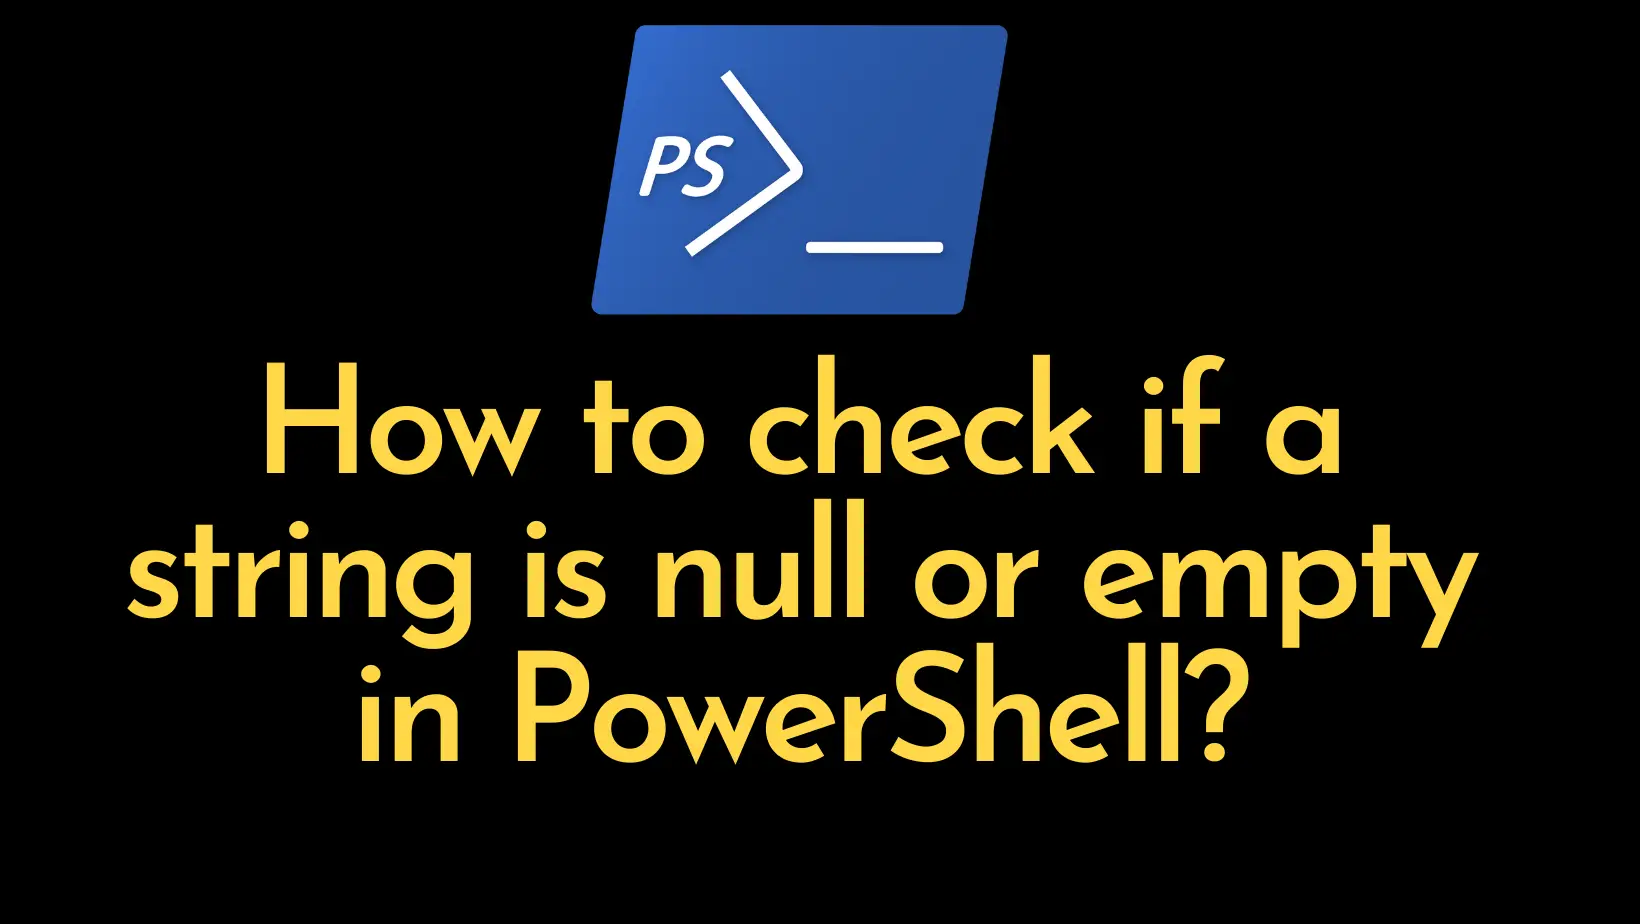 How To Check If A String Is Null Or Empty In Powershell